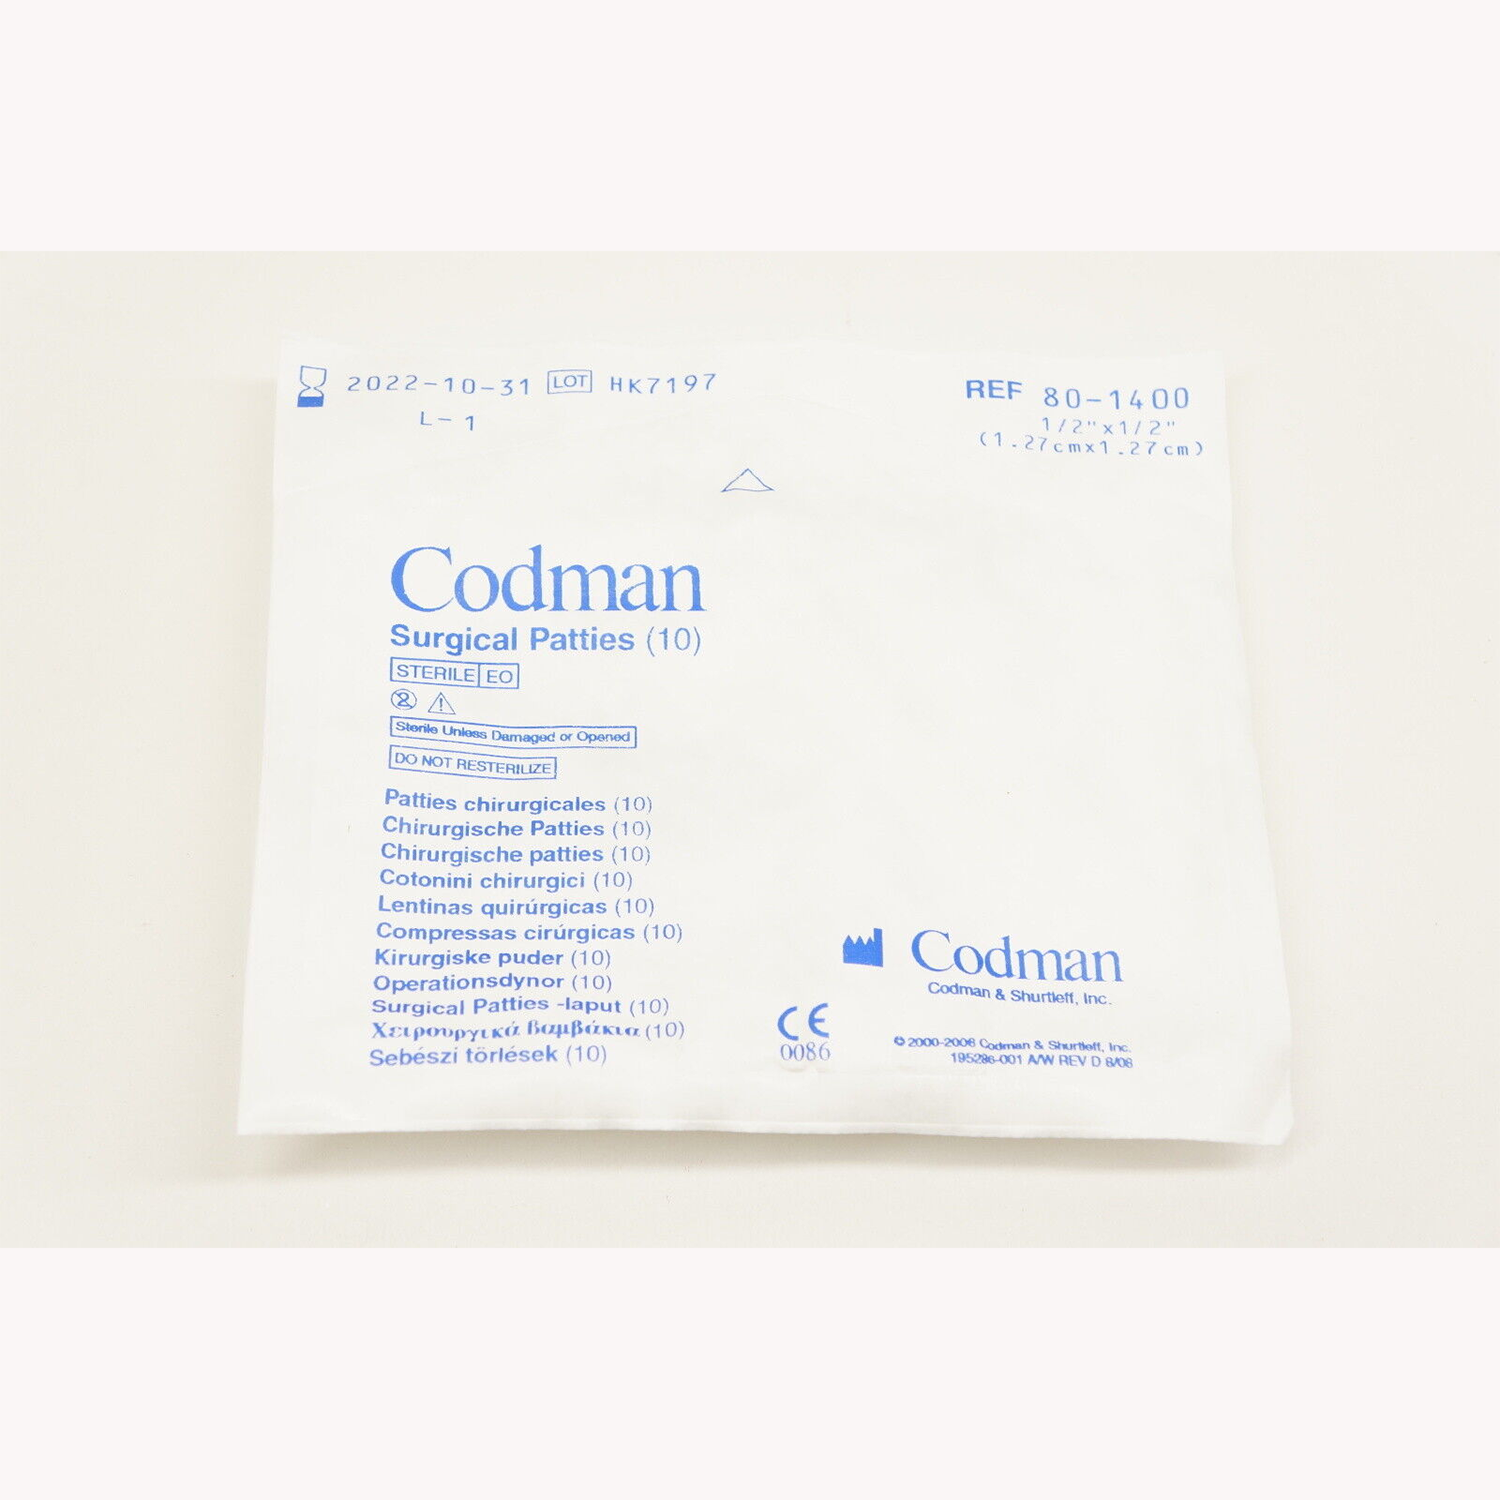 Codman Surgical Patties | 1.27 x 1.27cm | Pack of 200 (20 Packages per Dispenser Box x 10 Boxes)